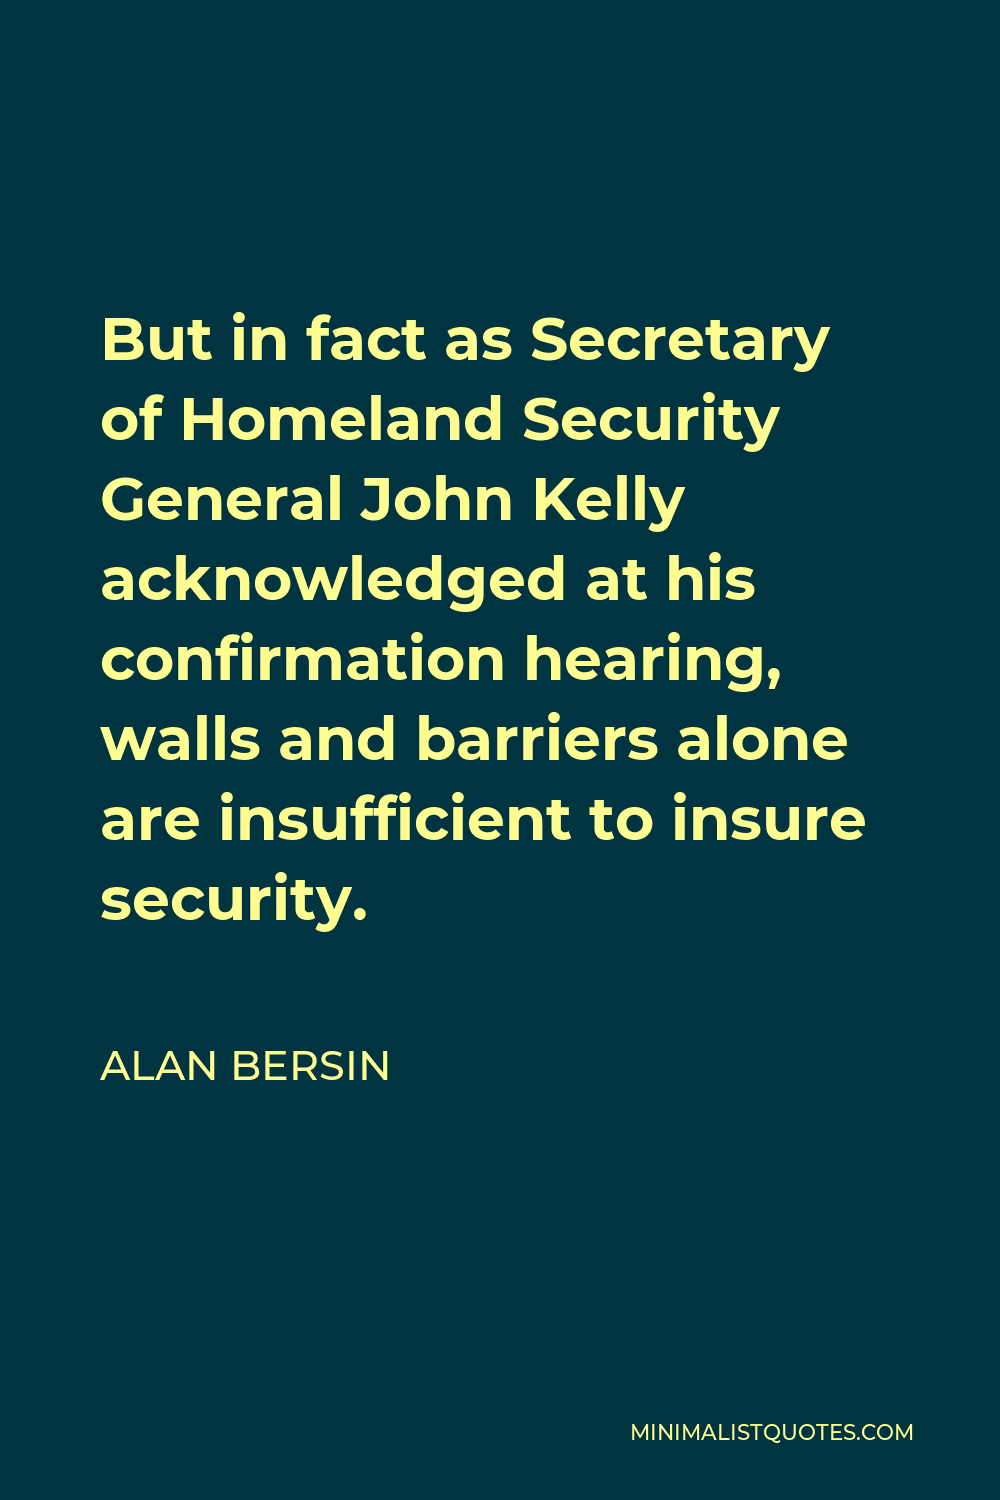 Alan Bersin Quote - But in fact as Secretary of Homeland Security General John Kelly acknowledged at his confirmation hearing, walls and barriers alone are insufficient to insure security.